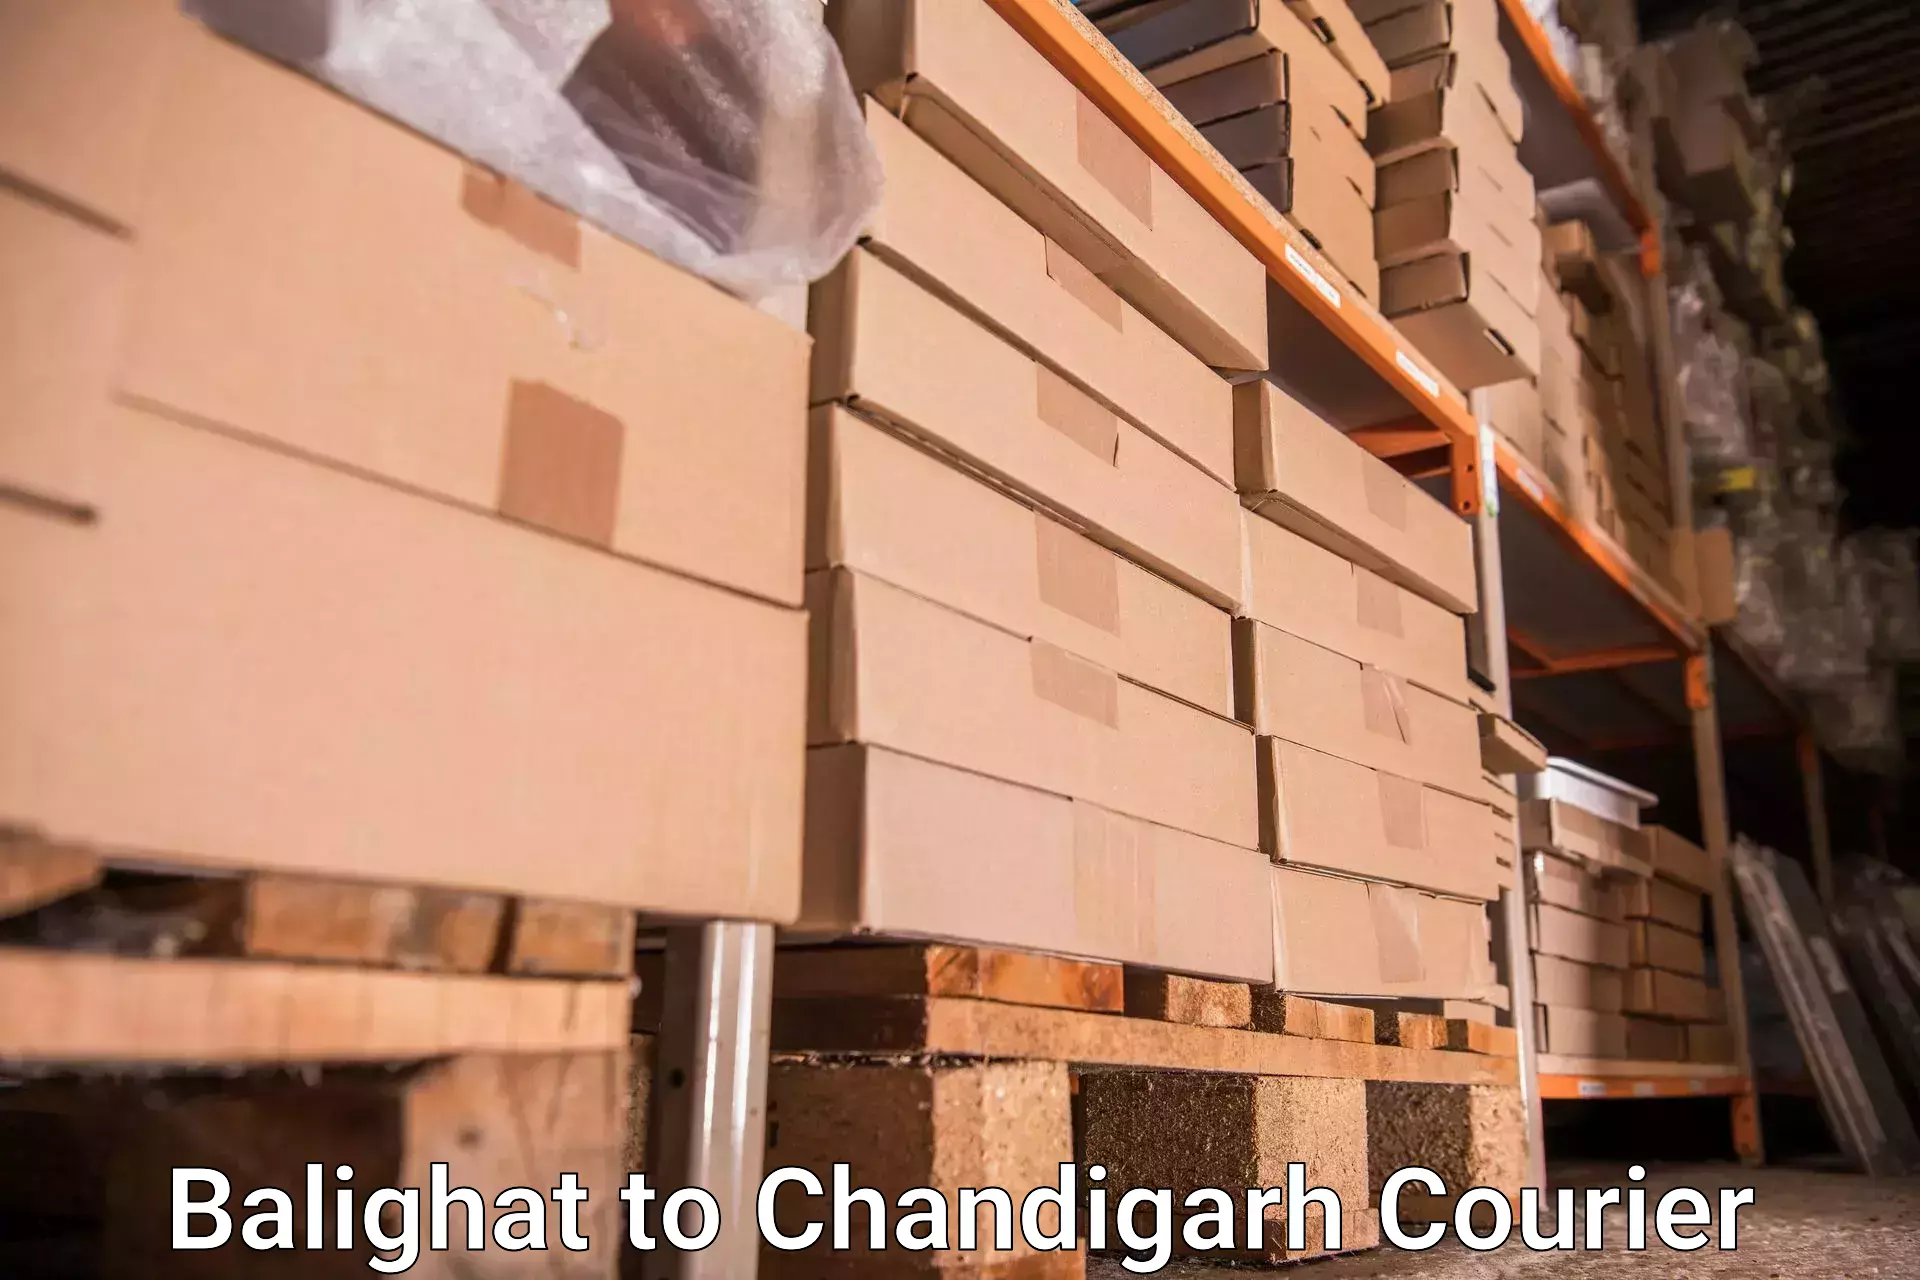 Baggage relocation service in Balighat to Chandigarh